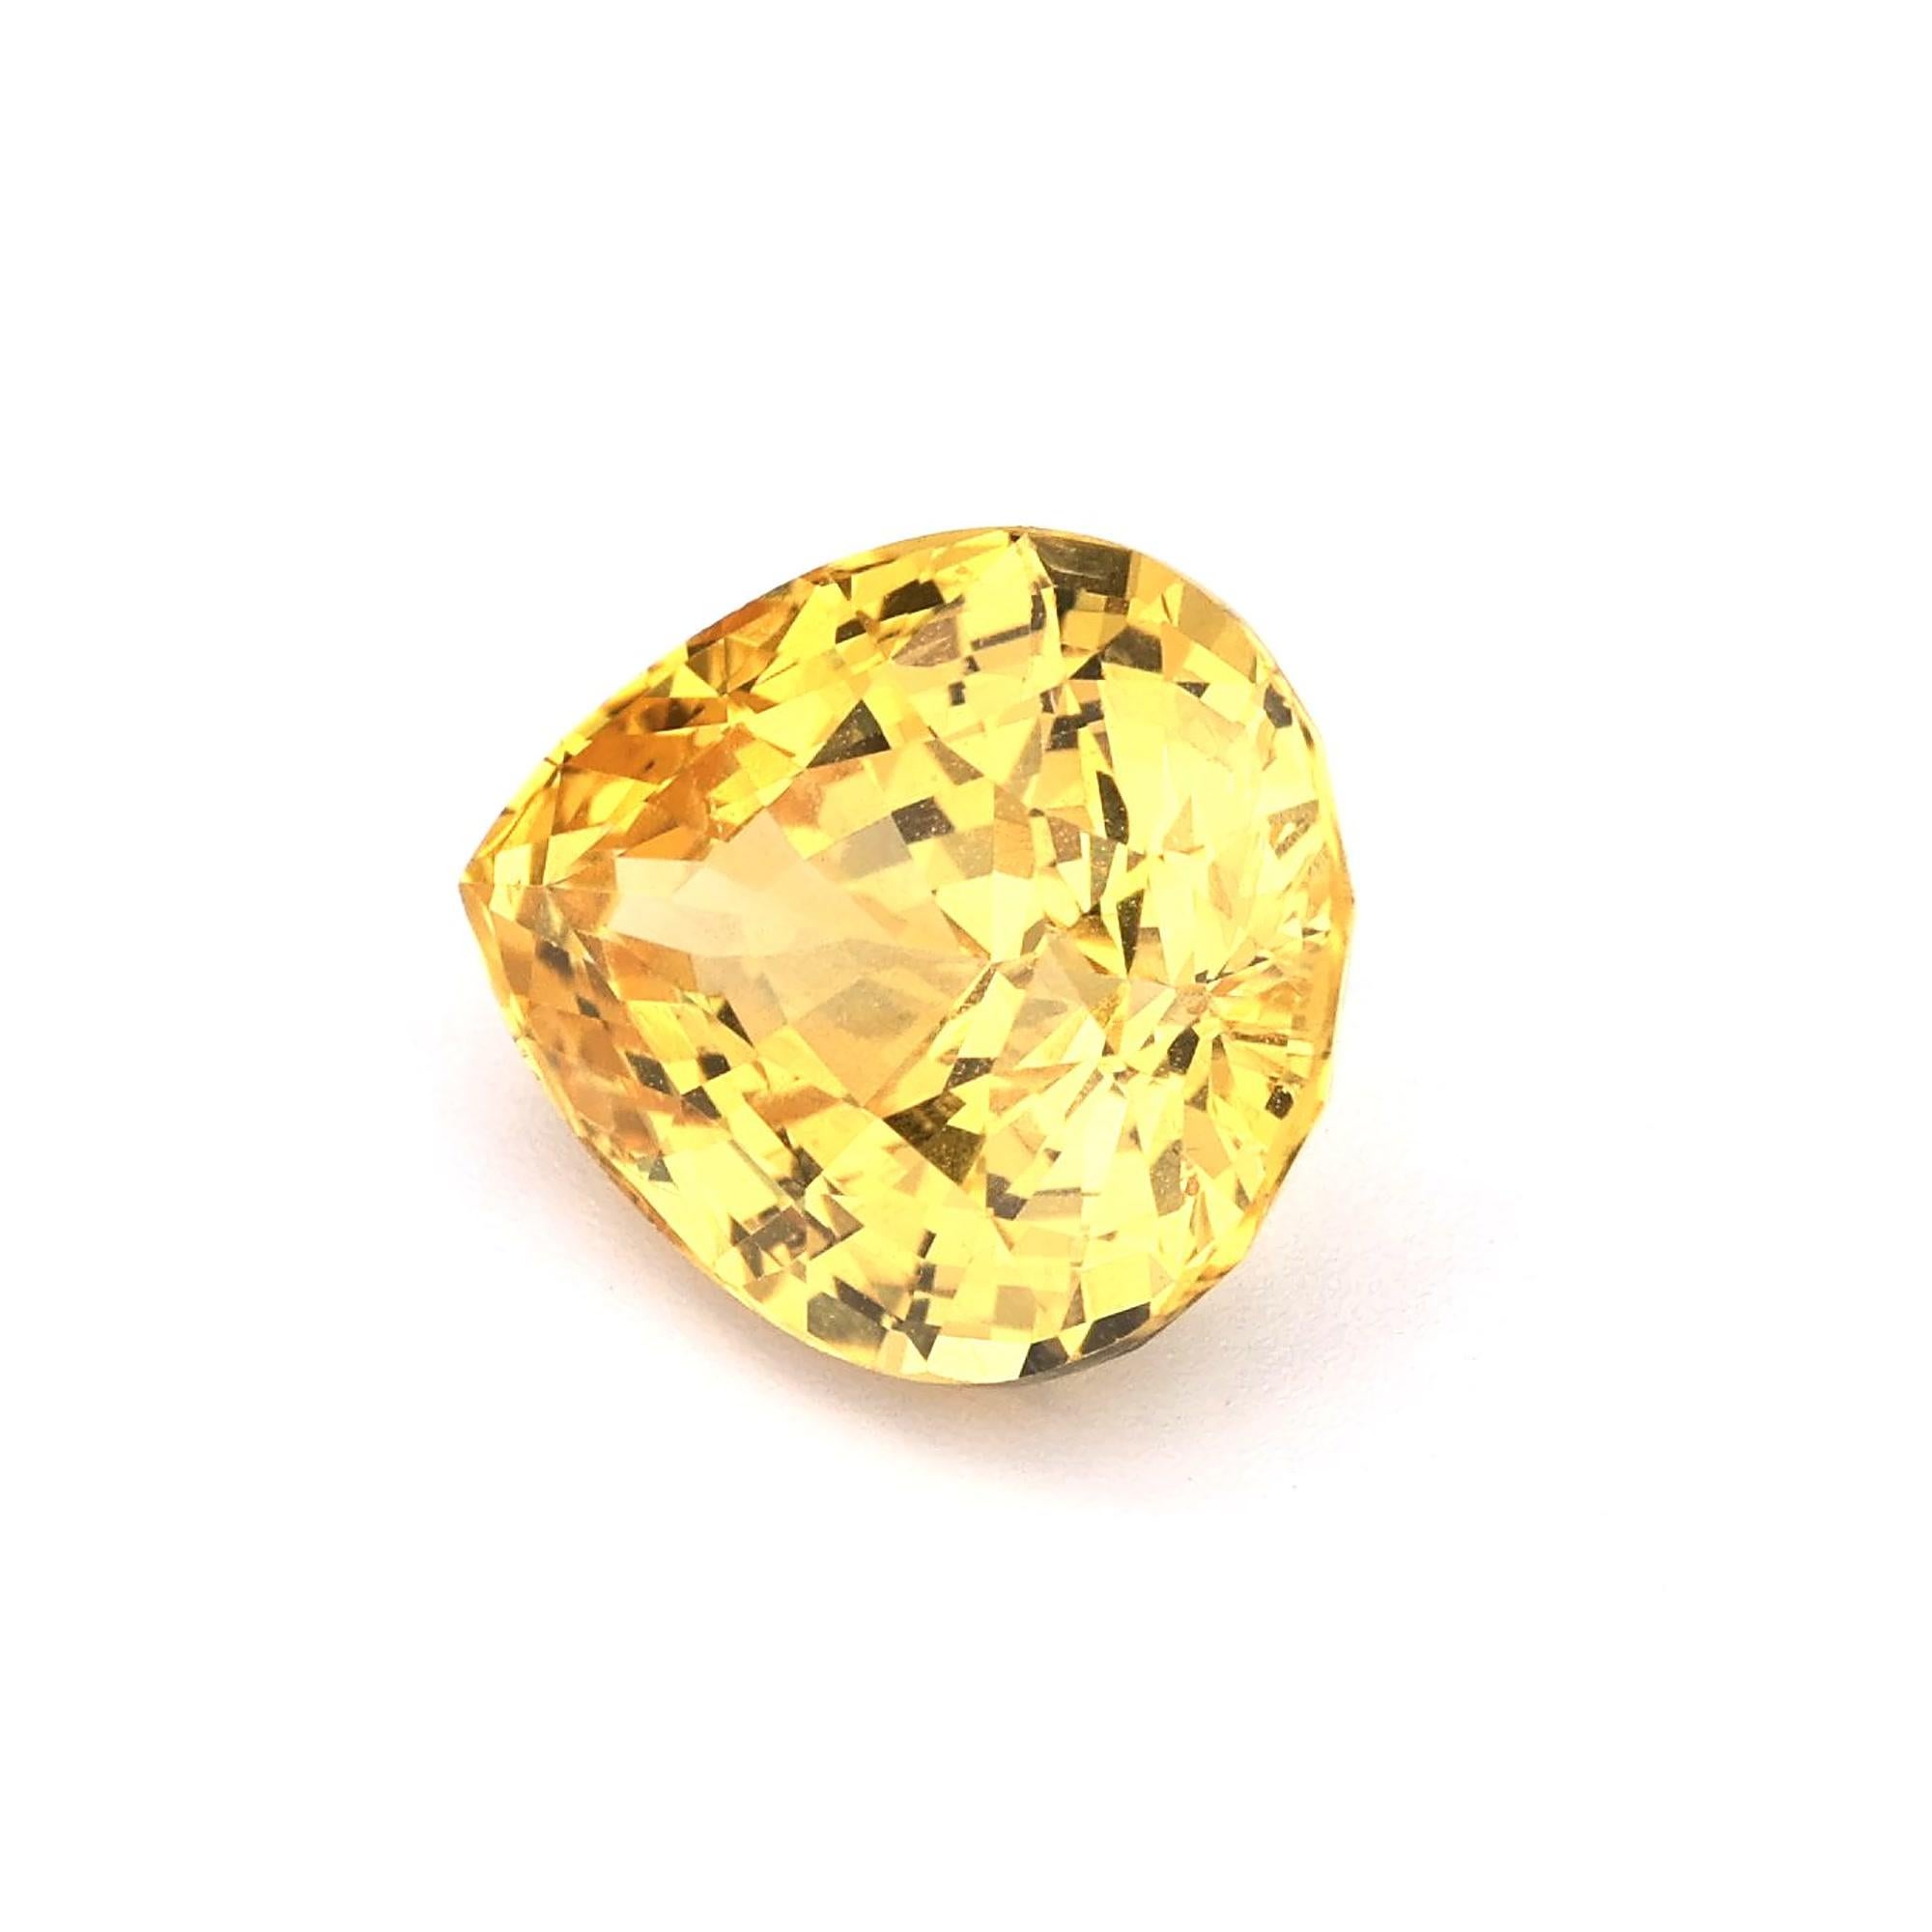 Modern Certified 4.45 ct Natural Yellow Sapphire Pear Shape Ceylon Origin Ring Stone For Sale